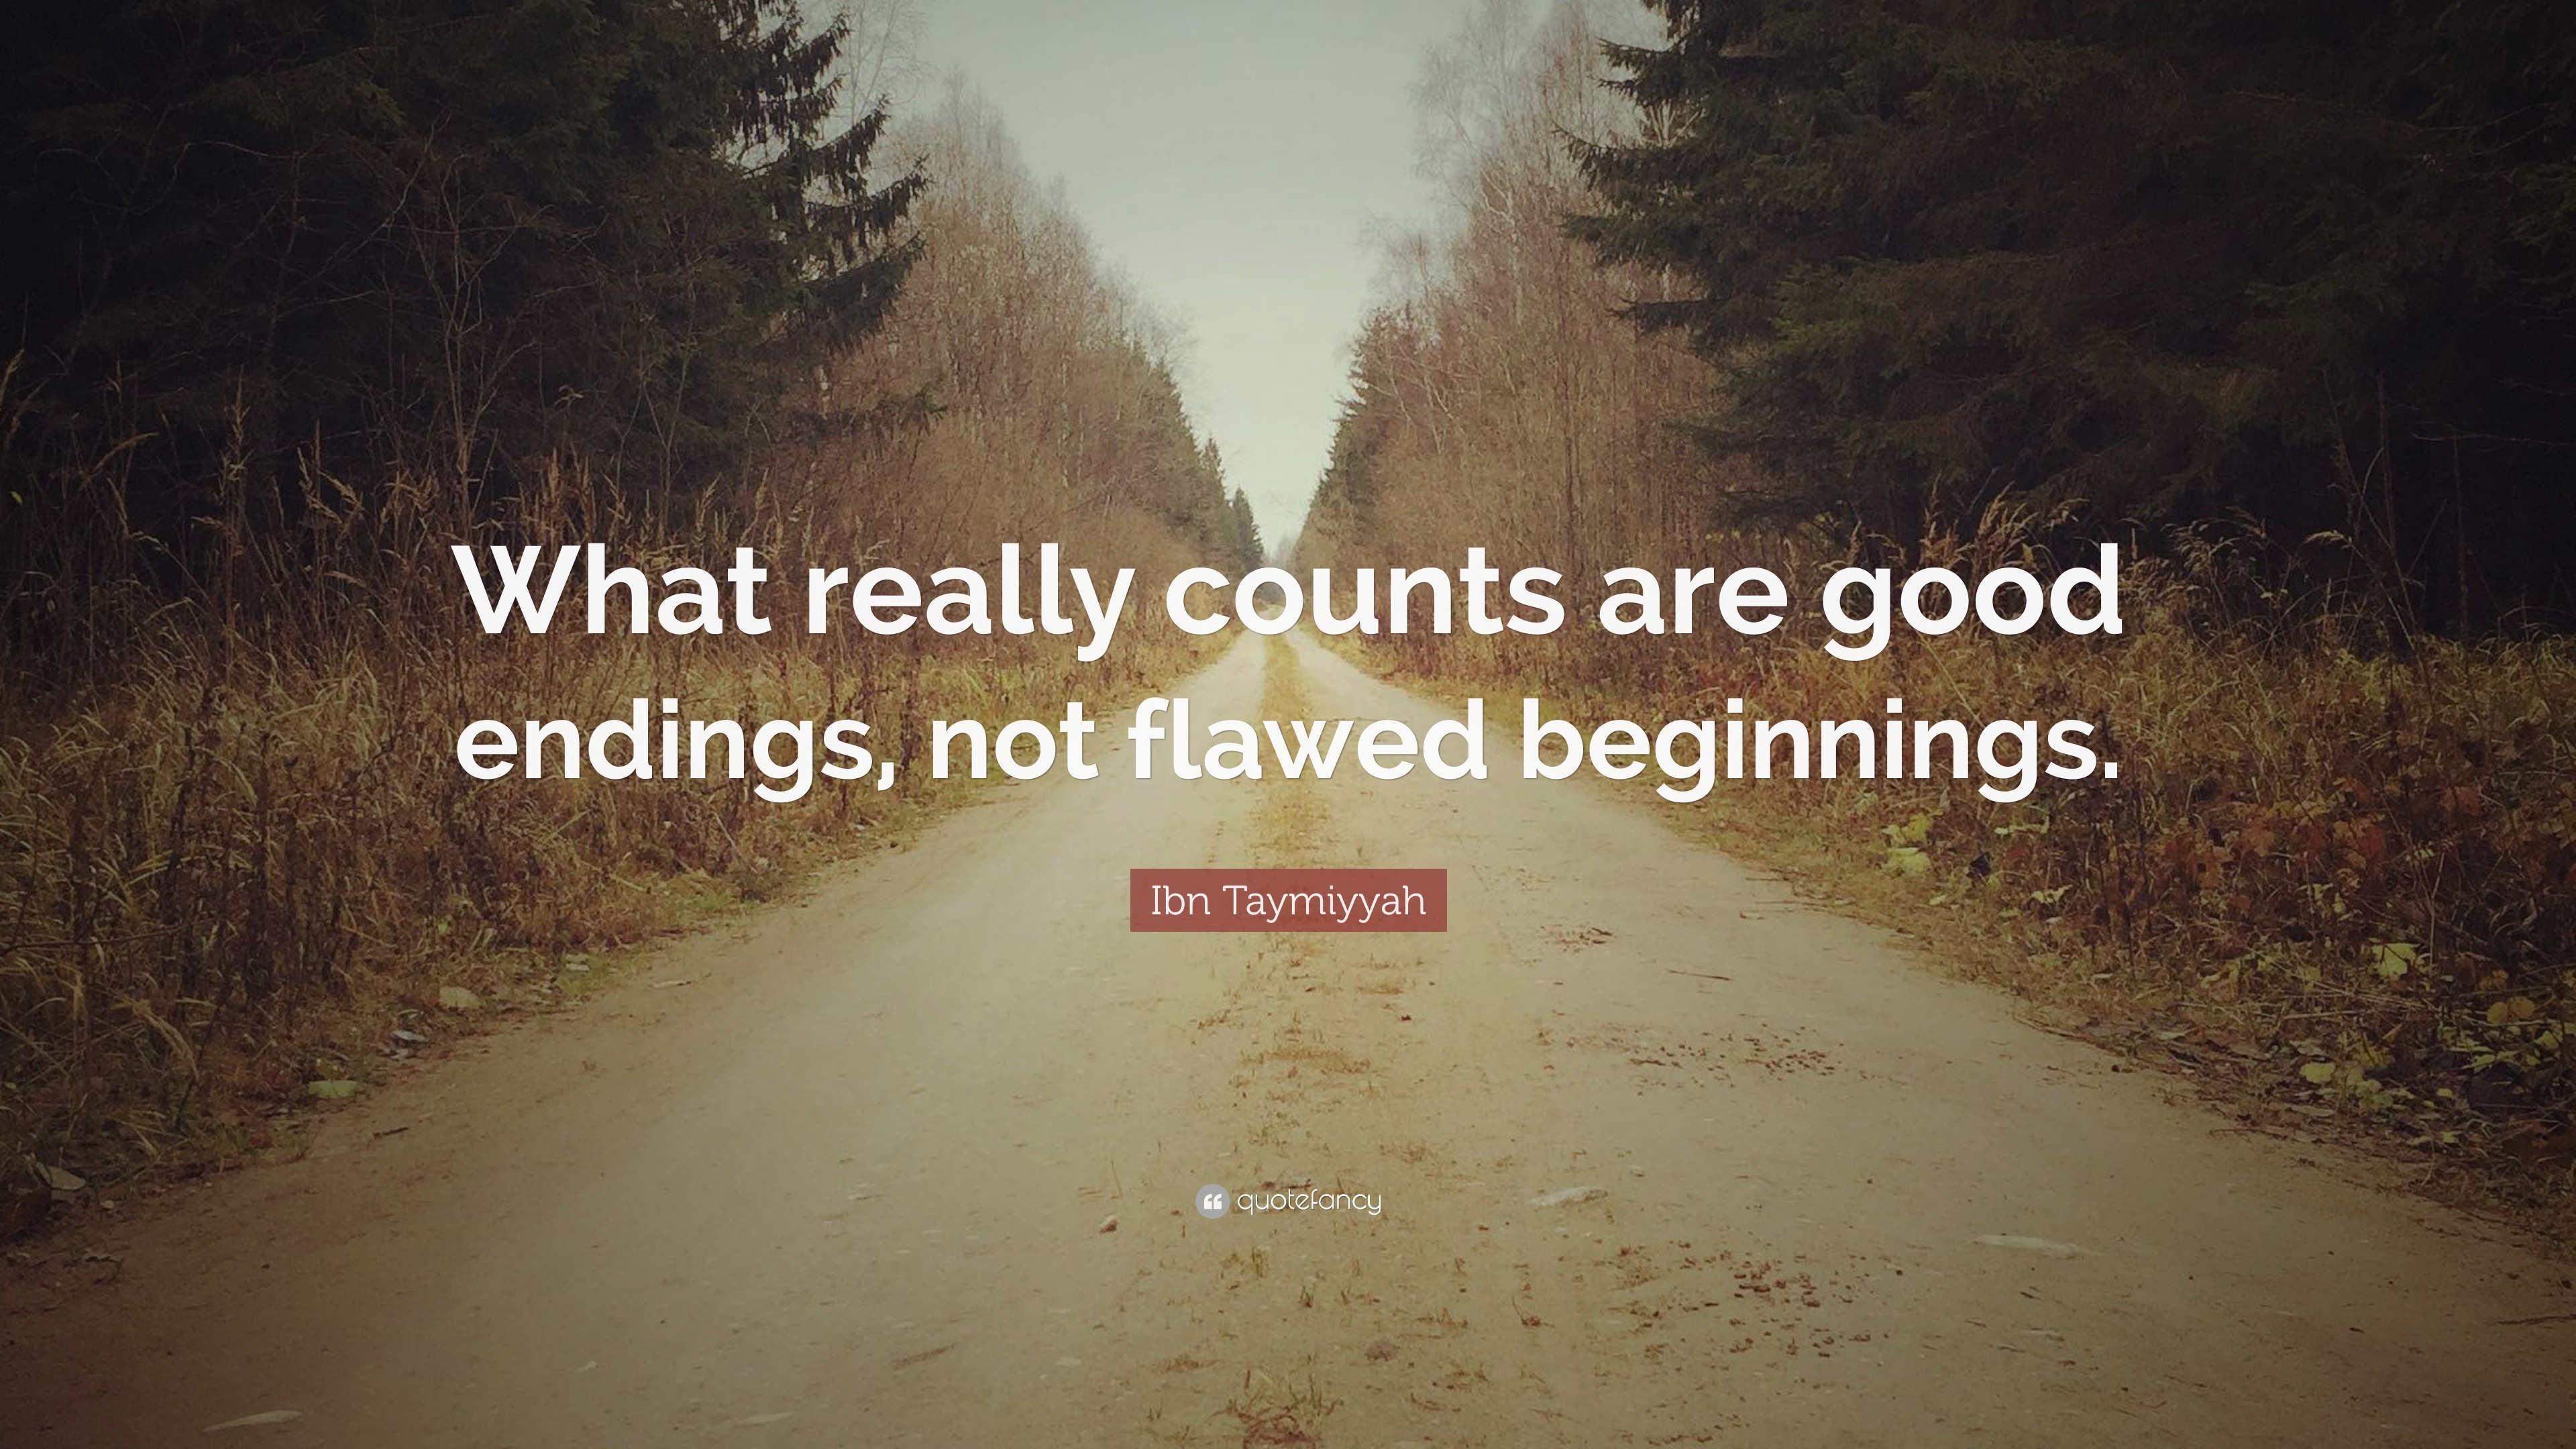 Ibn Taymiyyah Quotes (34 wallpapers) - Quotefancy